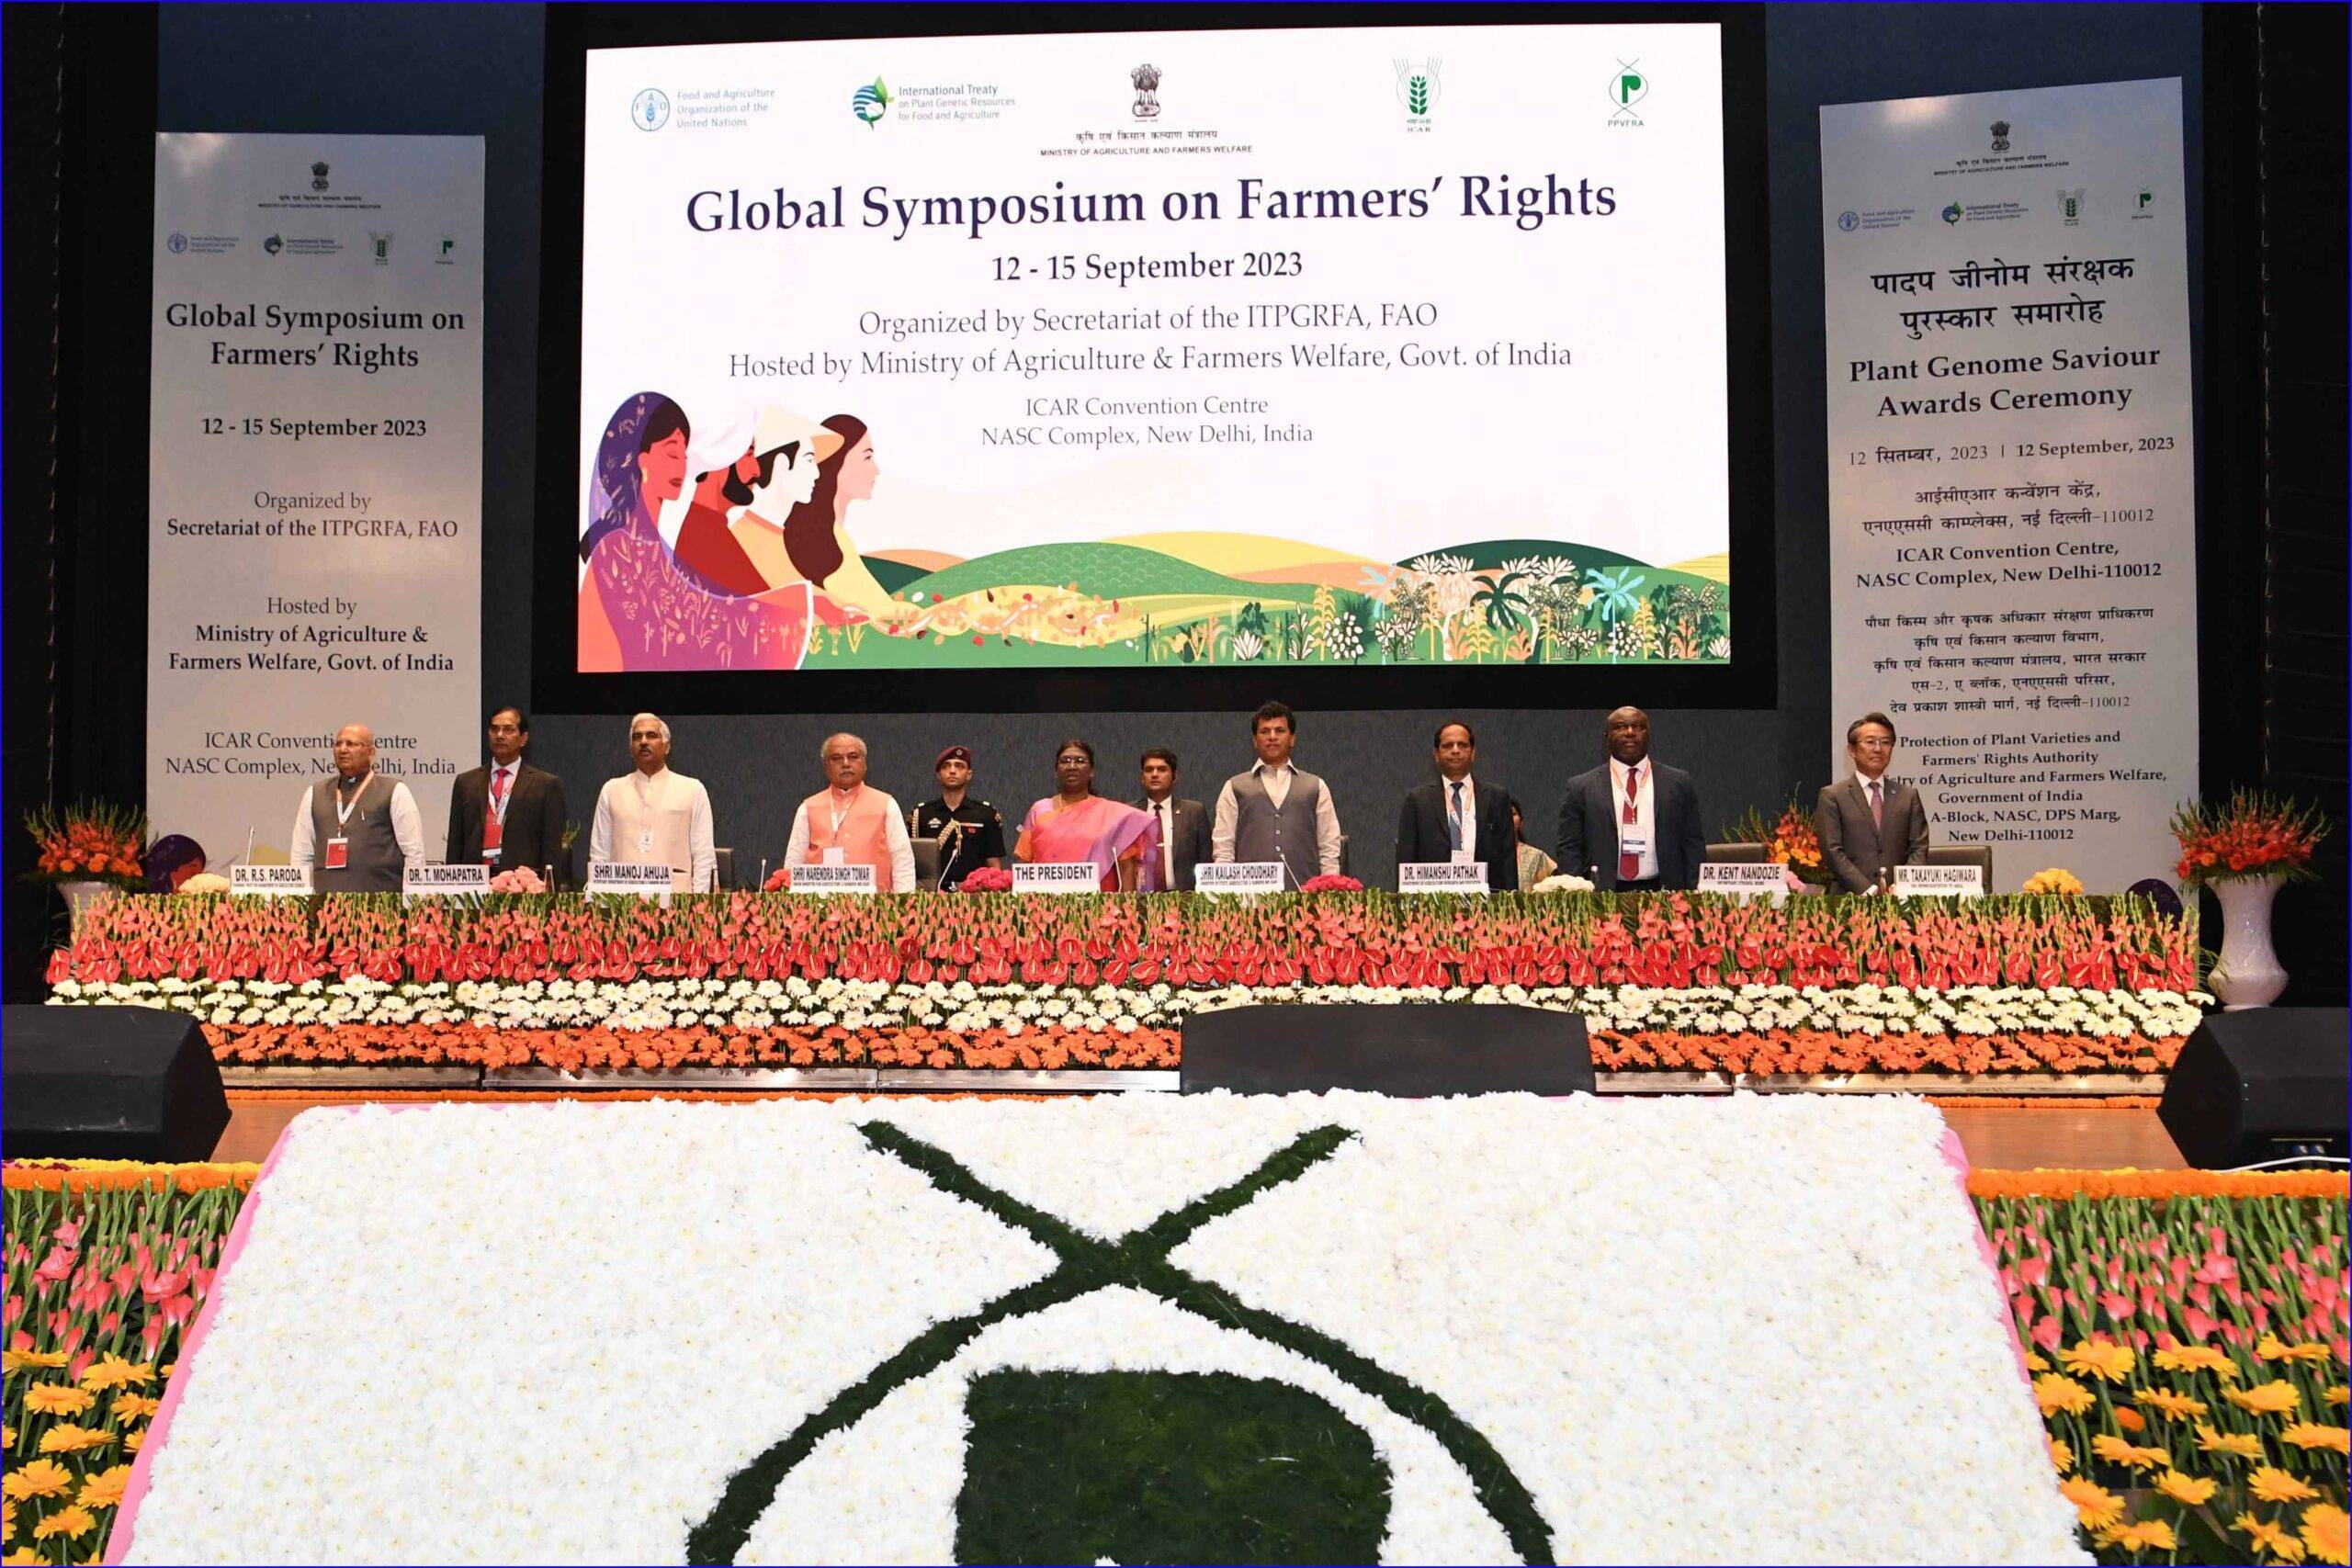 PRESIDENT OF INDIA INAUGURATES FIRST GLOBAL SYMPOSIUM ON FARMERS’ RIGHTS